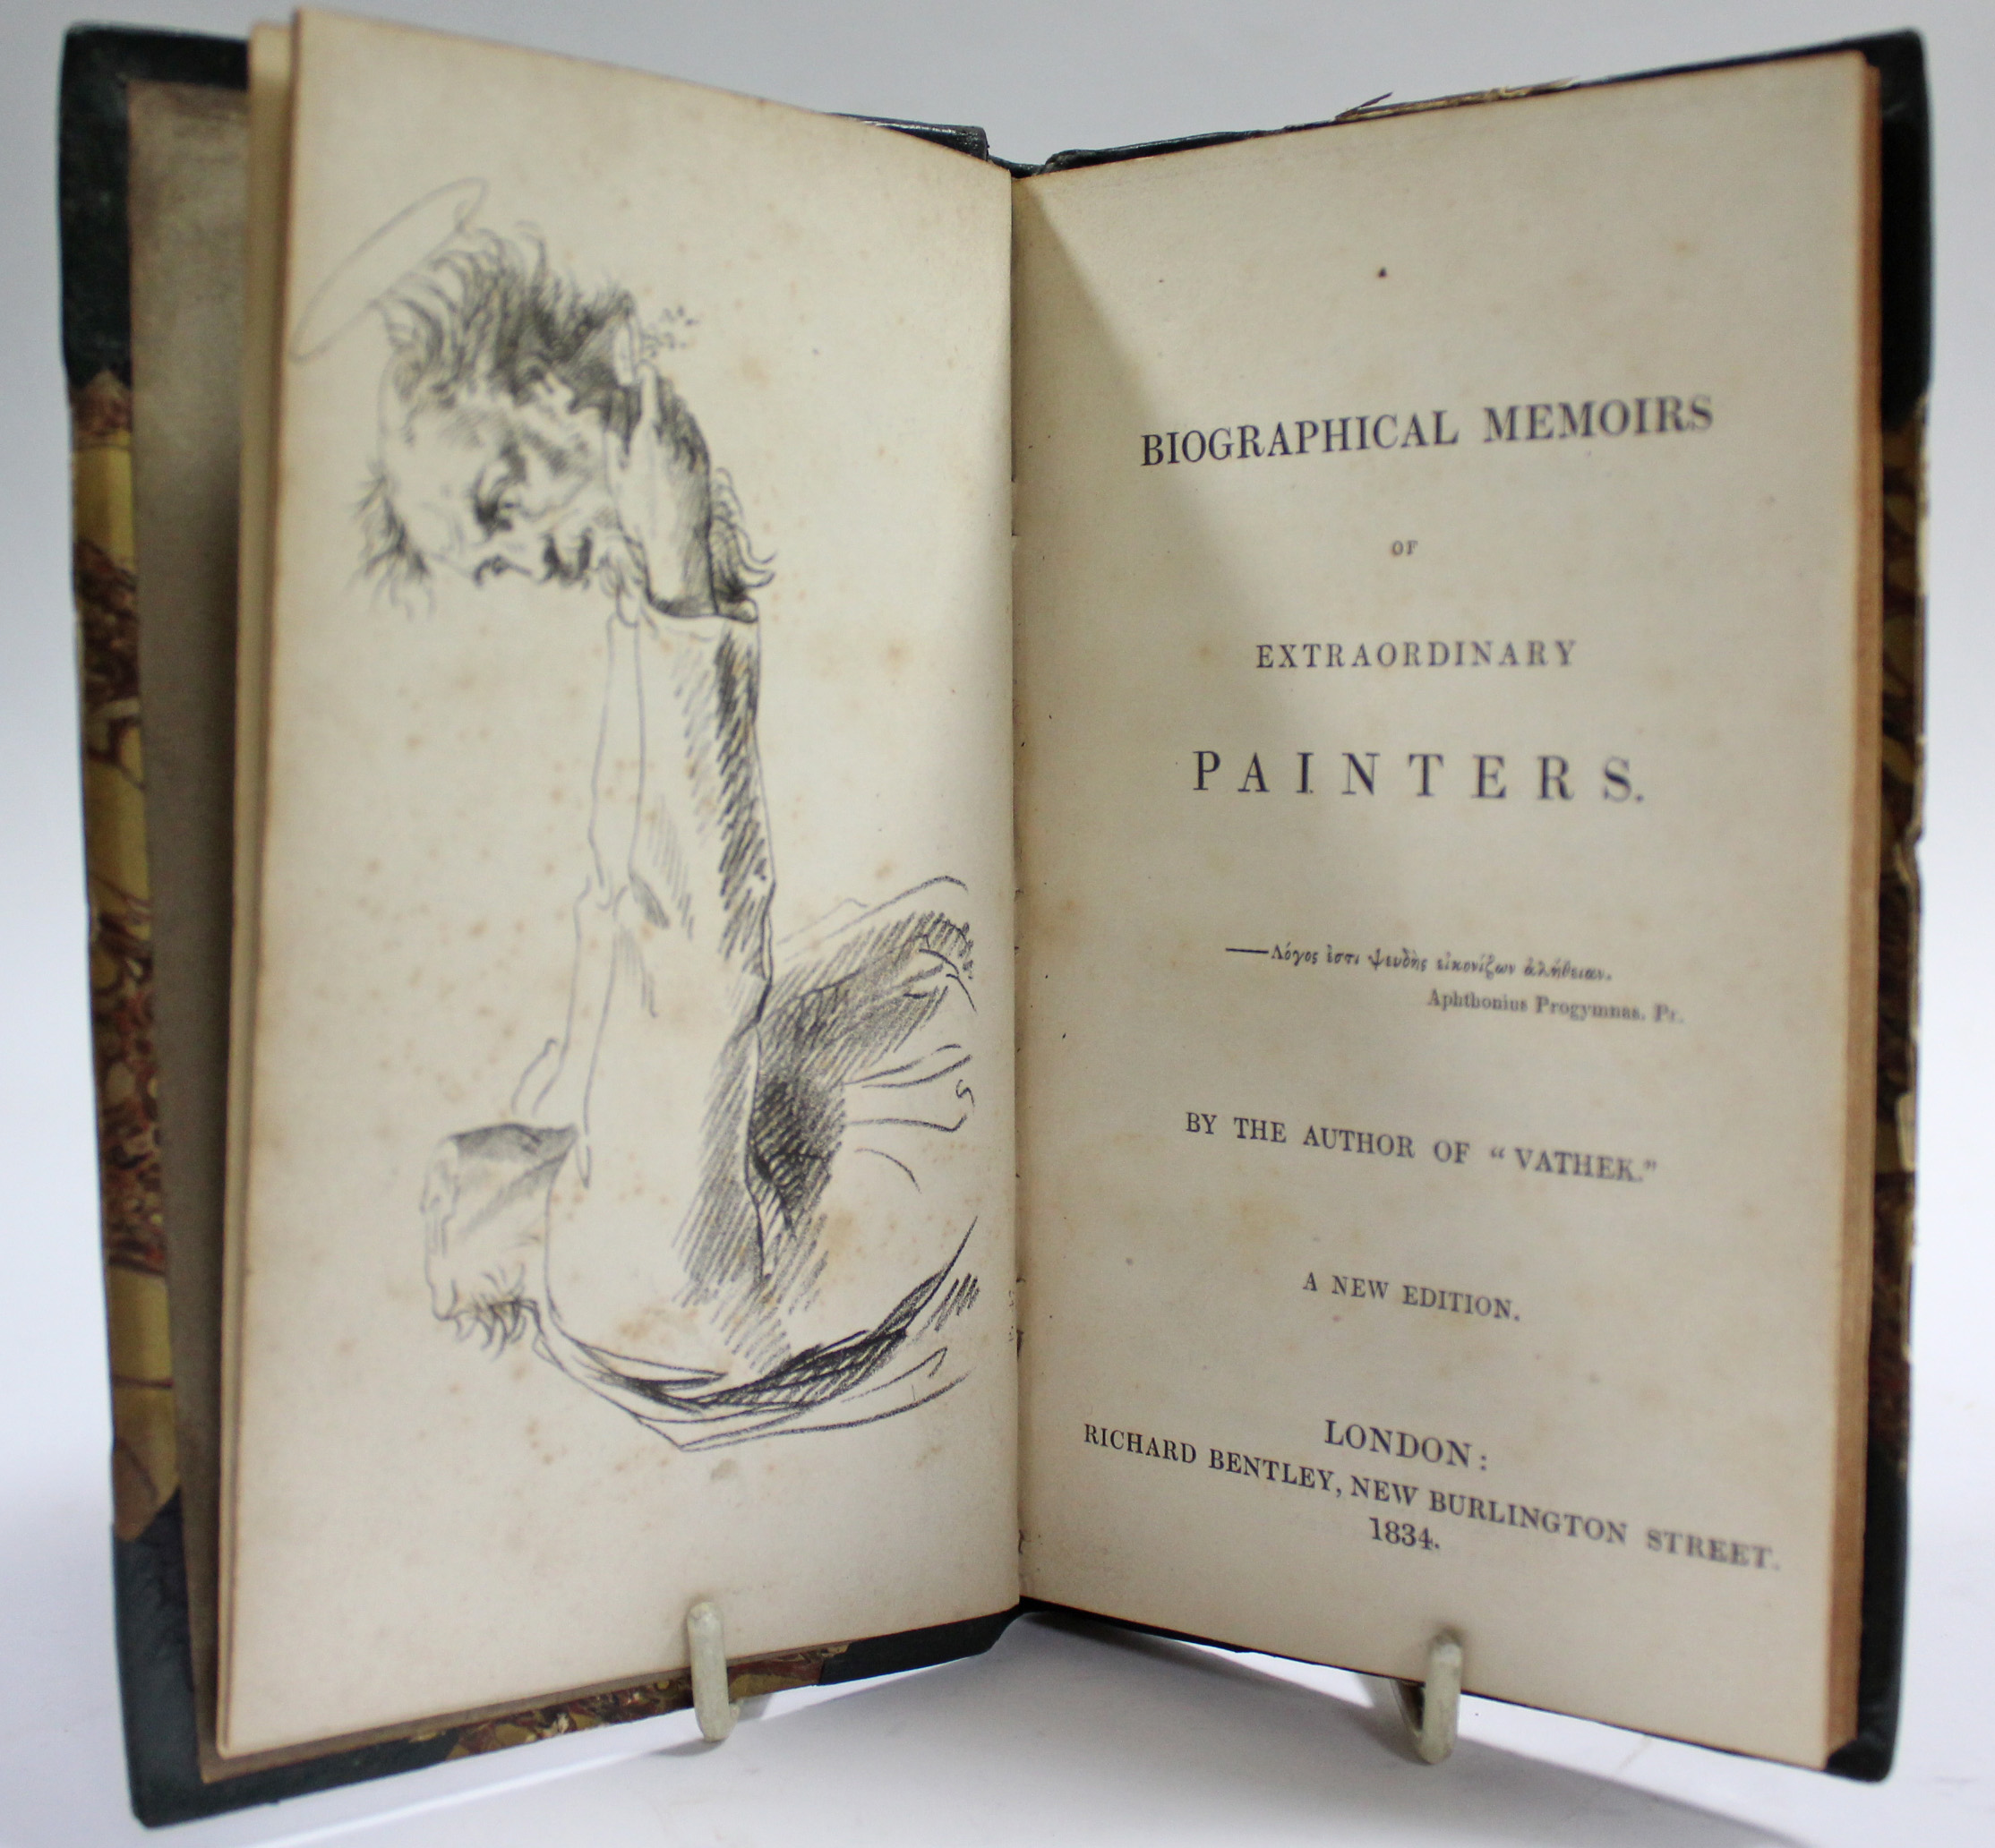 BECKFORD, William. “Biographical memoirs of Extraordinary Painters”; New Edition, publ. 1834 by - Image 3 of 3